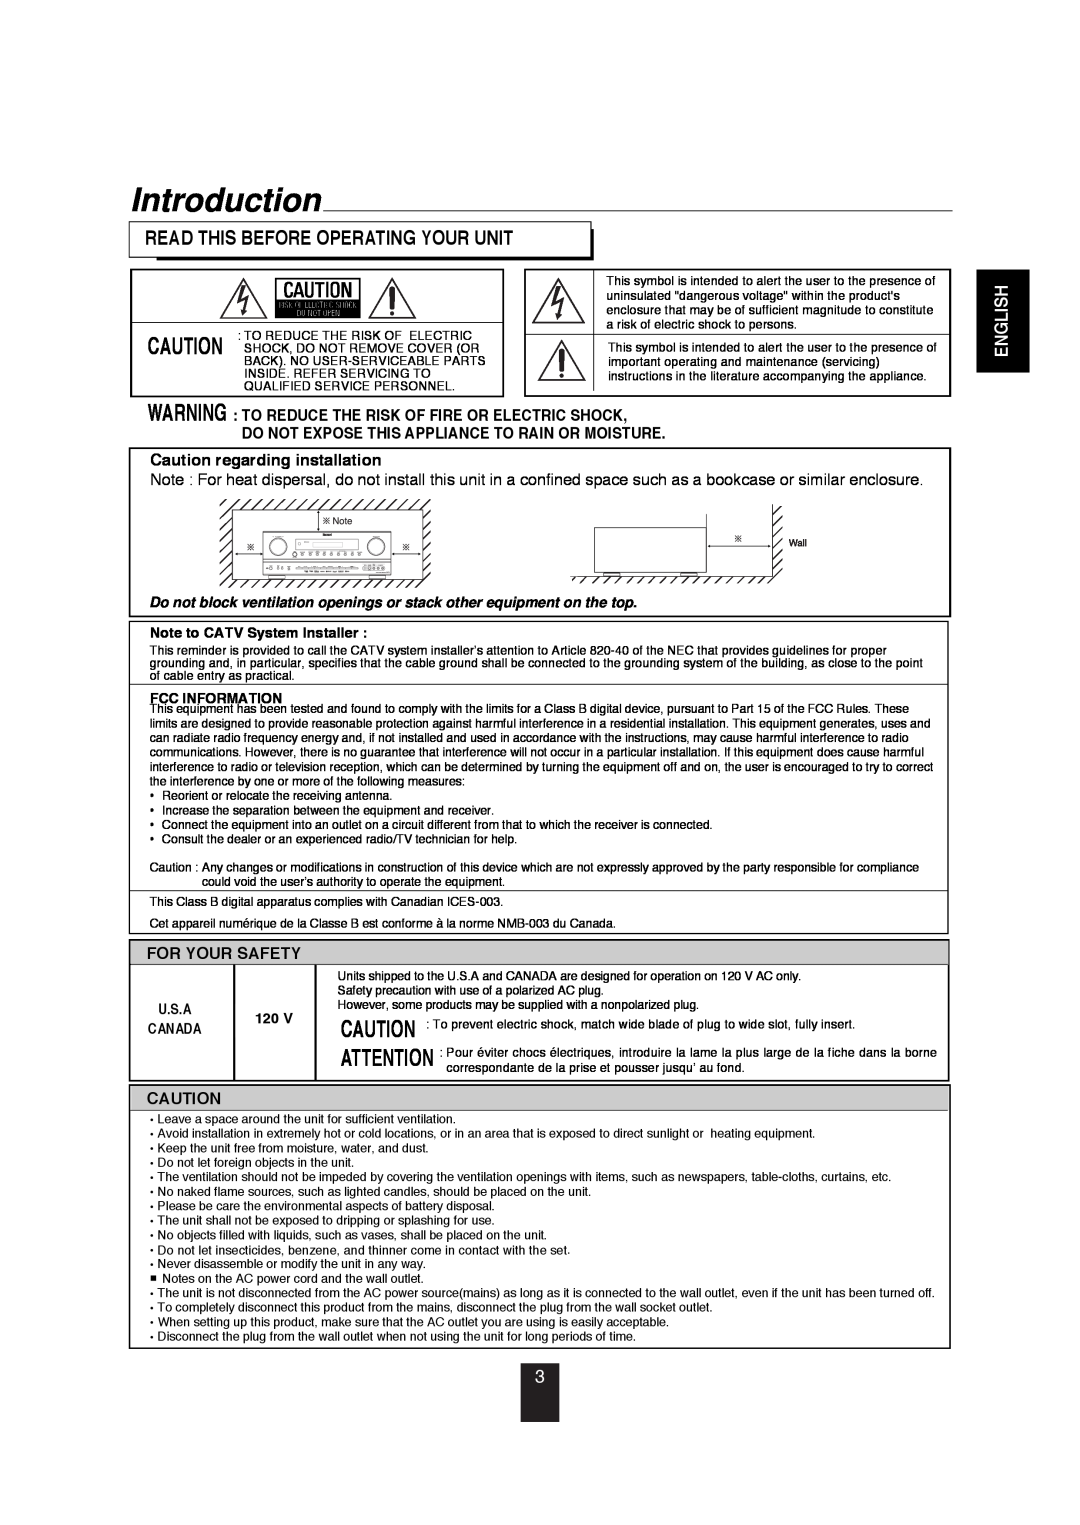 Sherwood R-872 manual Introduction, Read This Before Operating Your Unit, Do Not Expose This Appliance To Rain Or Moisture 